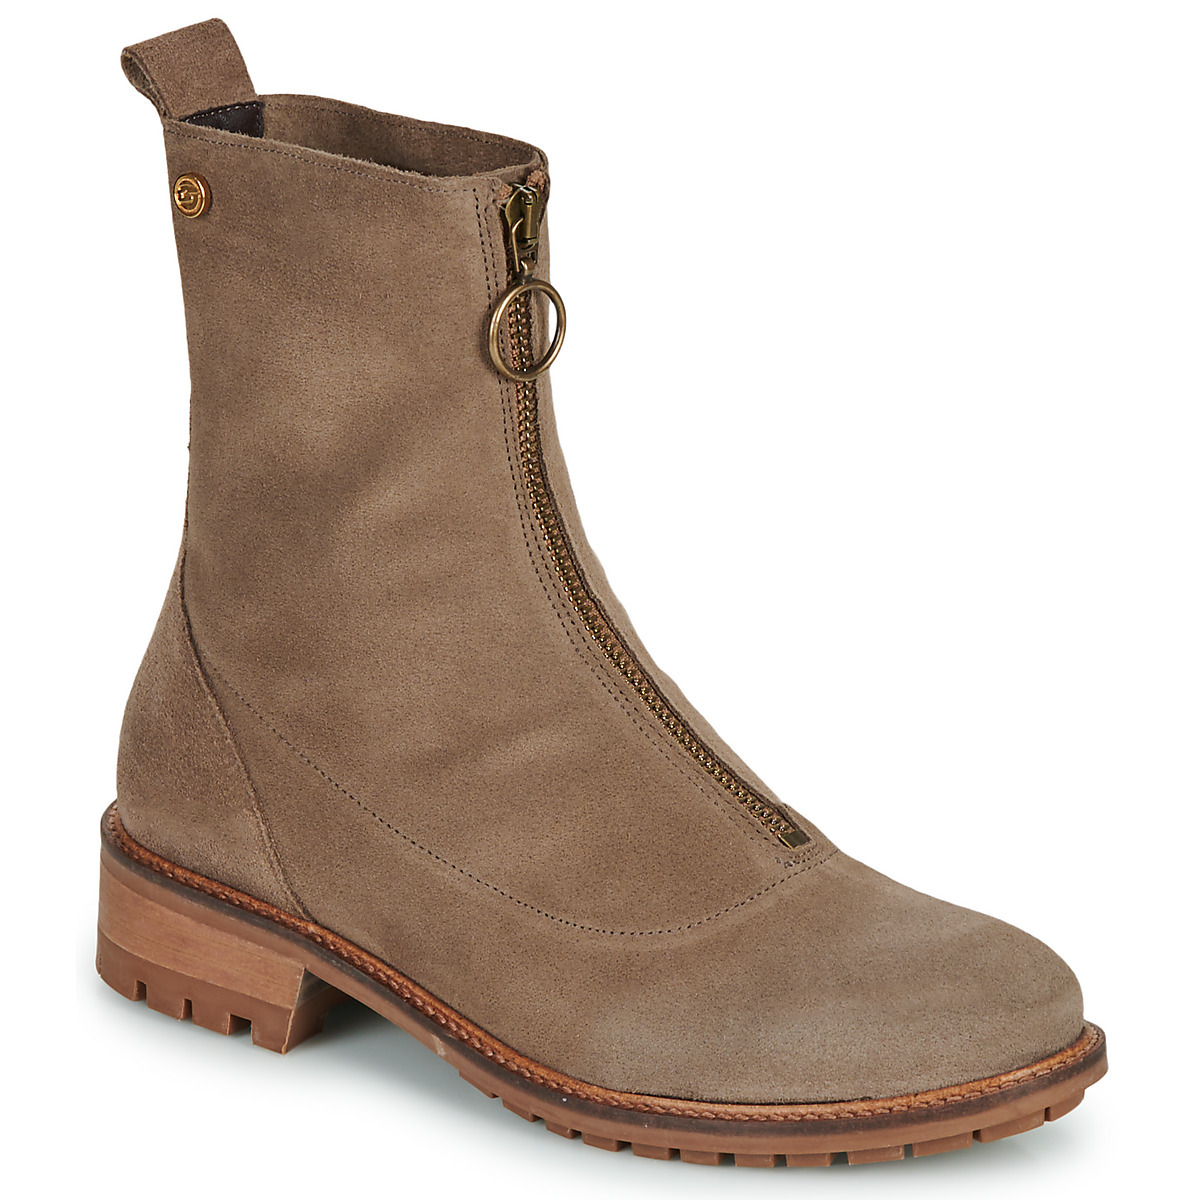 Betty London - Woman Boots in Beige Spartoo GOOFASH